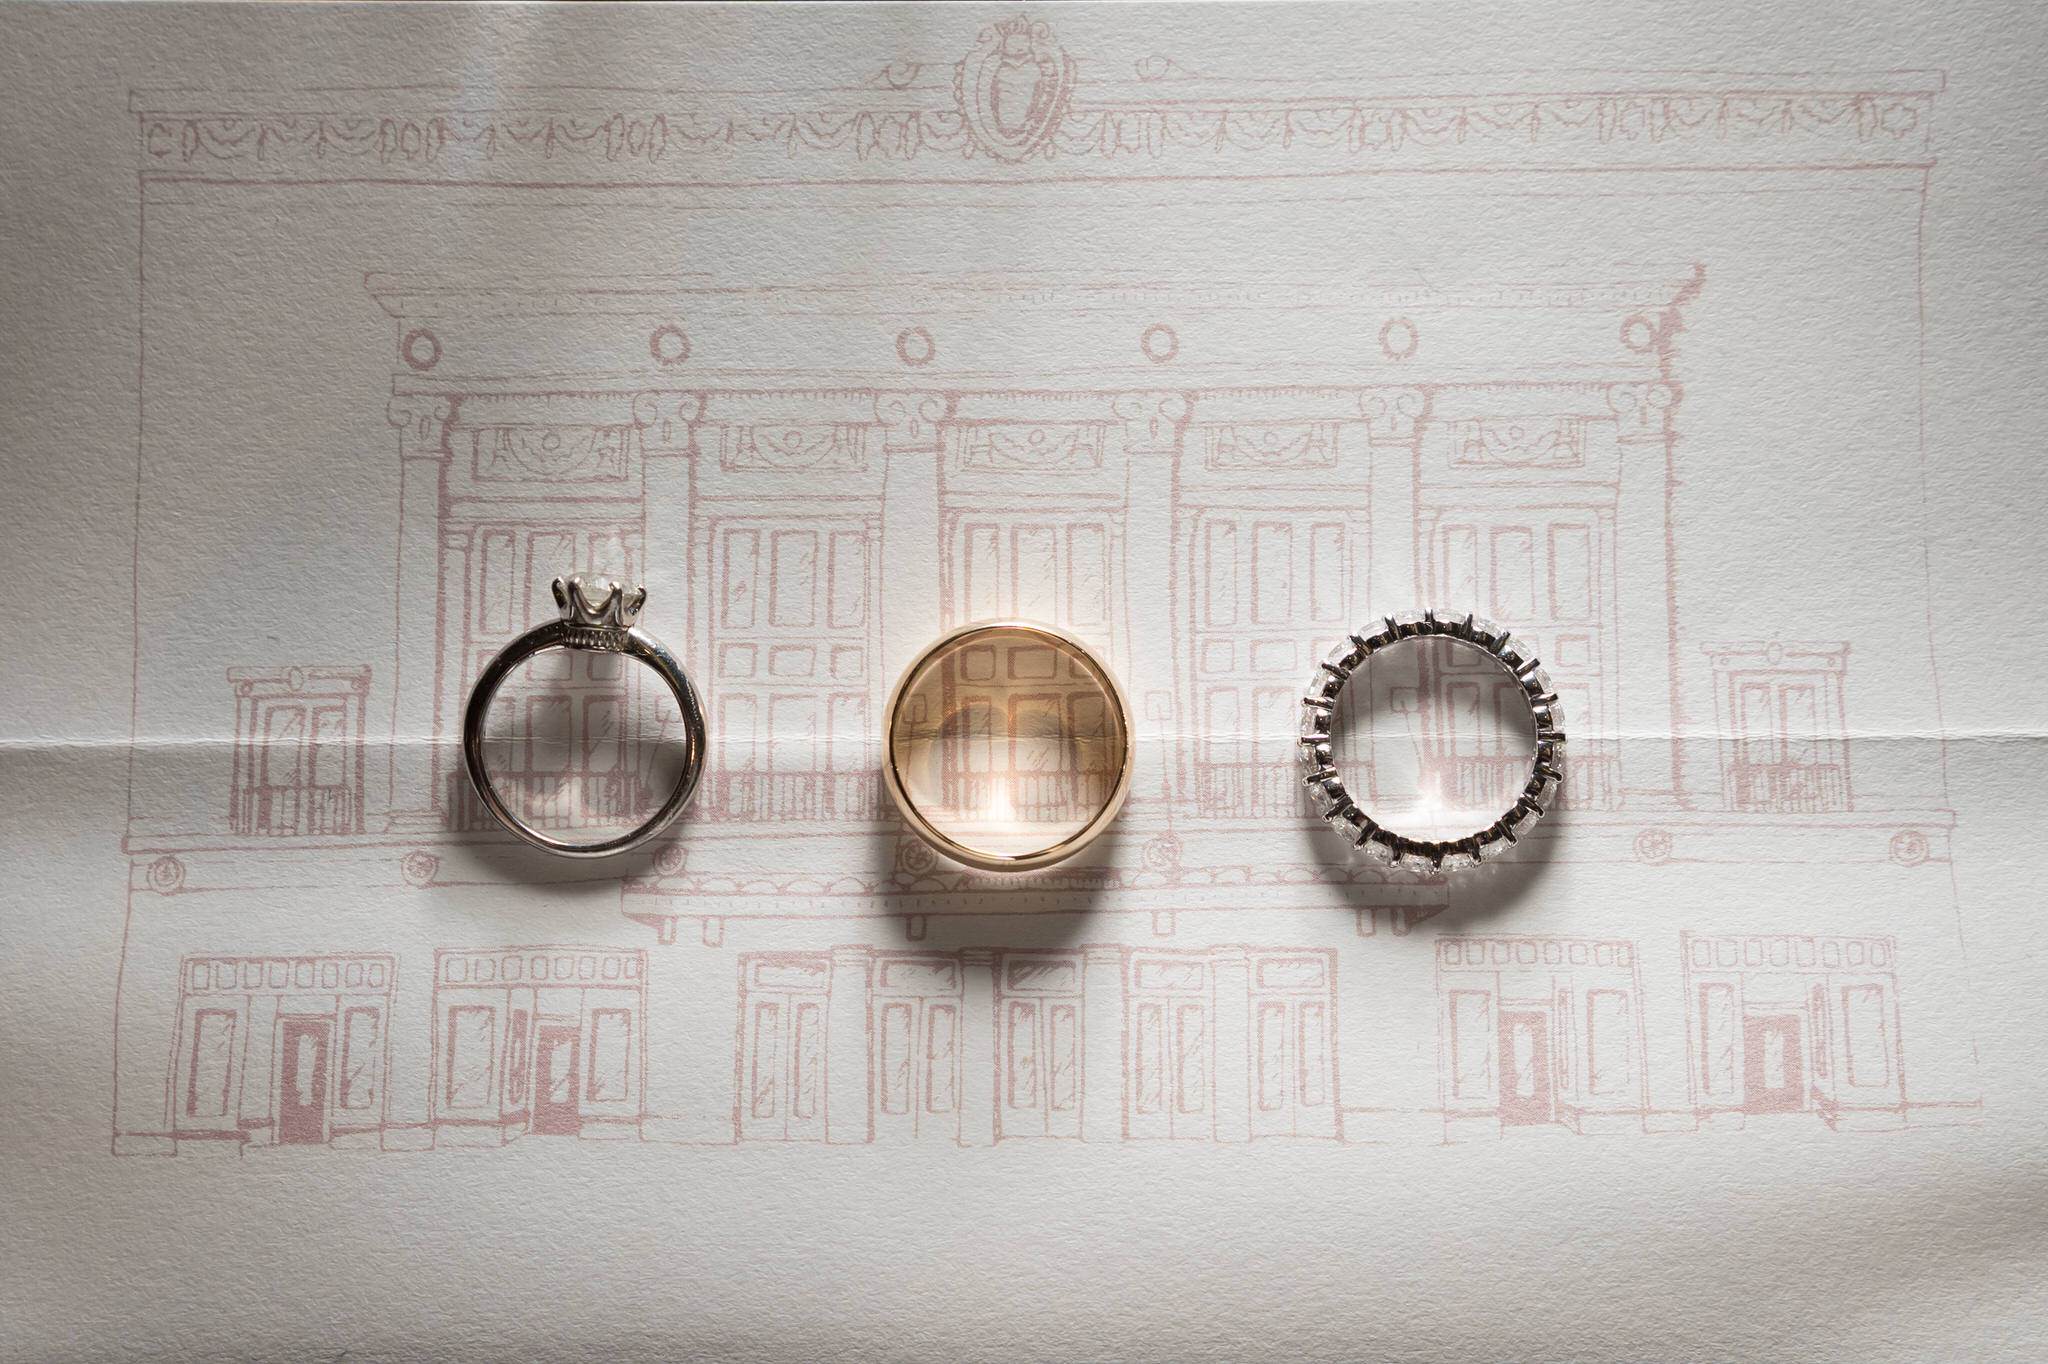 wedding rings on a paper drawing of Detroit's Orchestra Hall